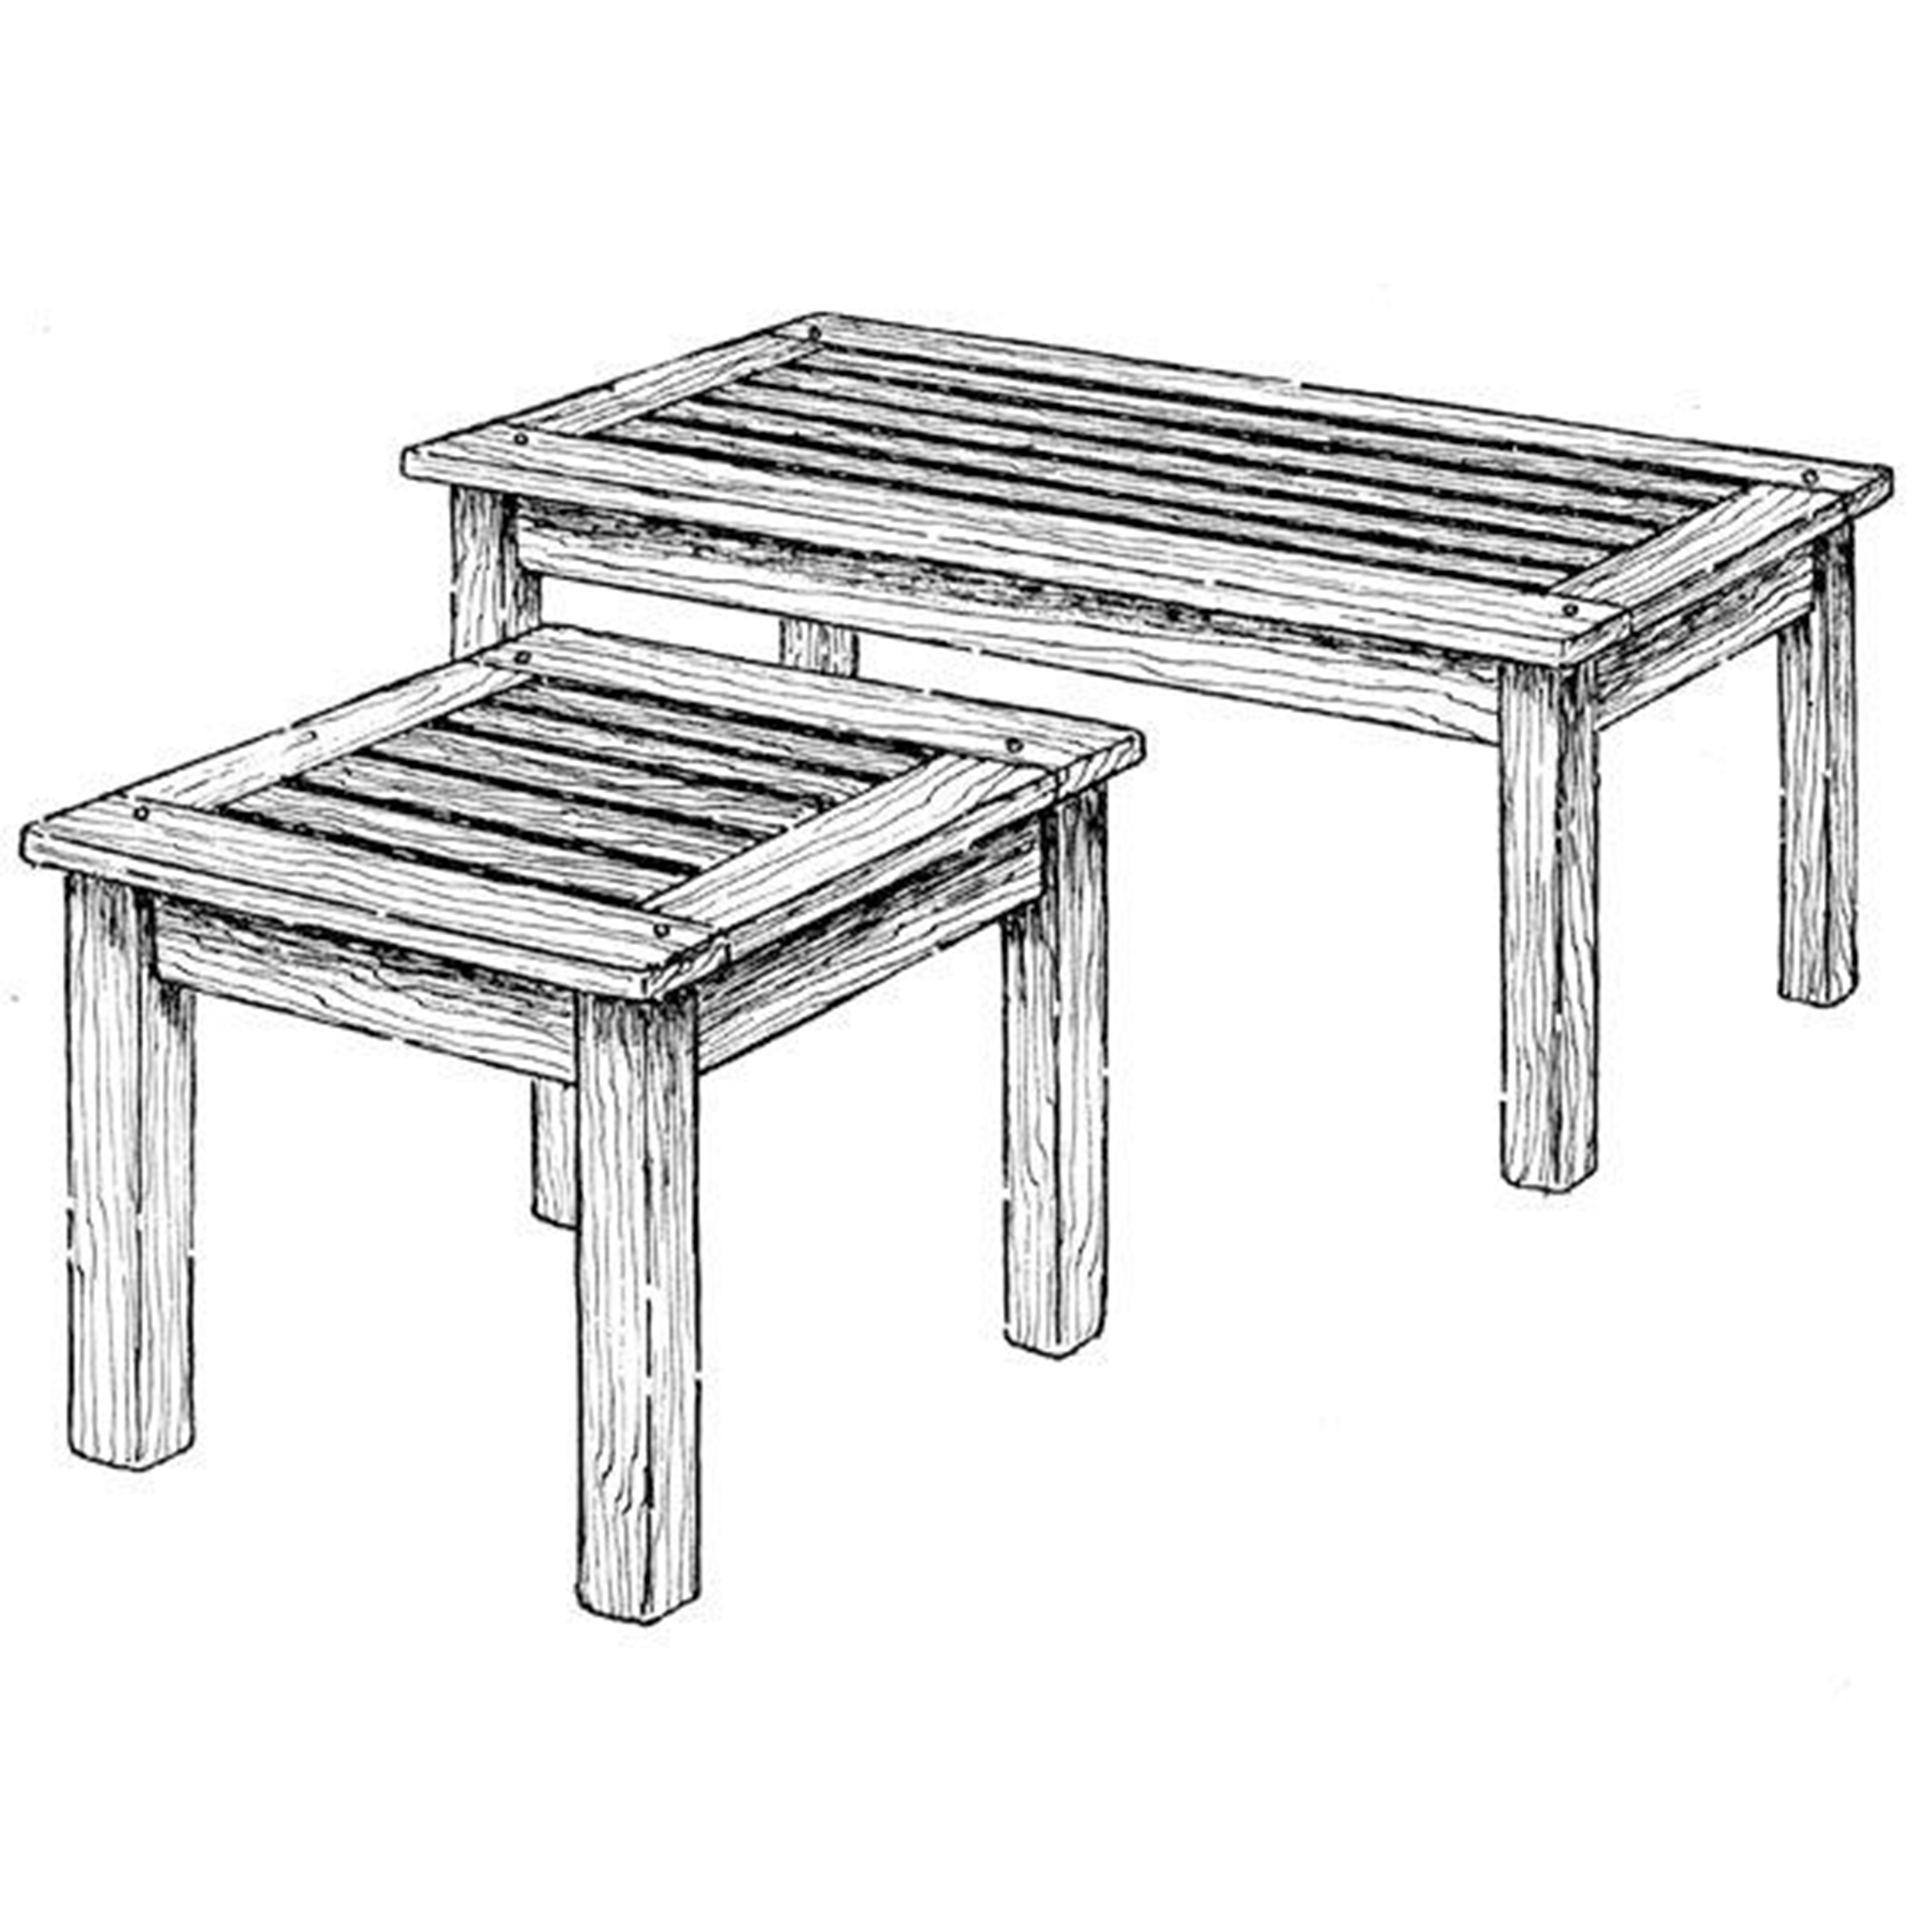 Woodworking Project Paper Plan To Build English Garden Tables